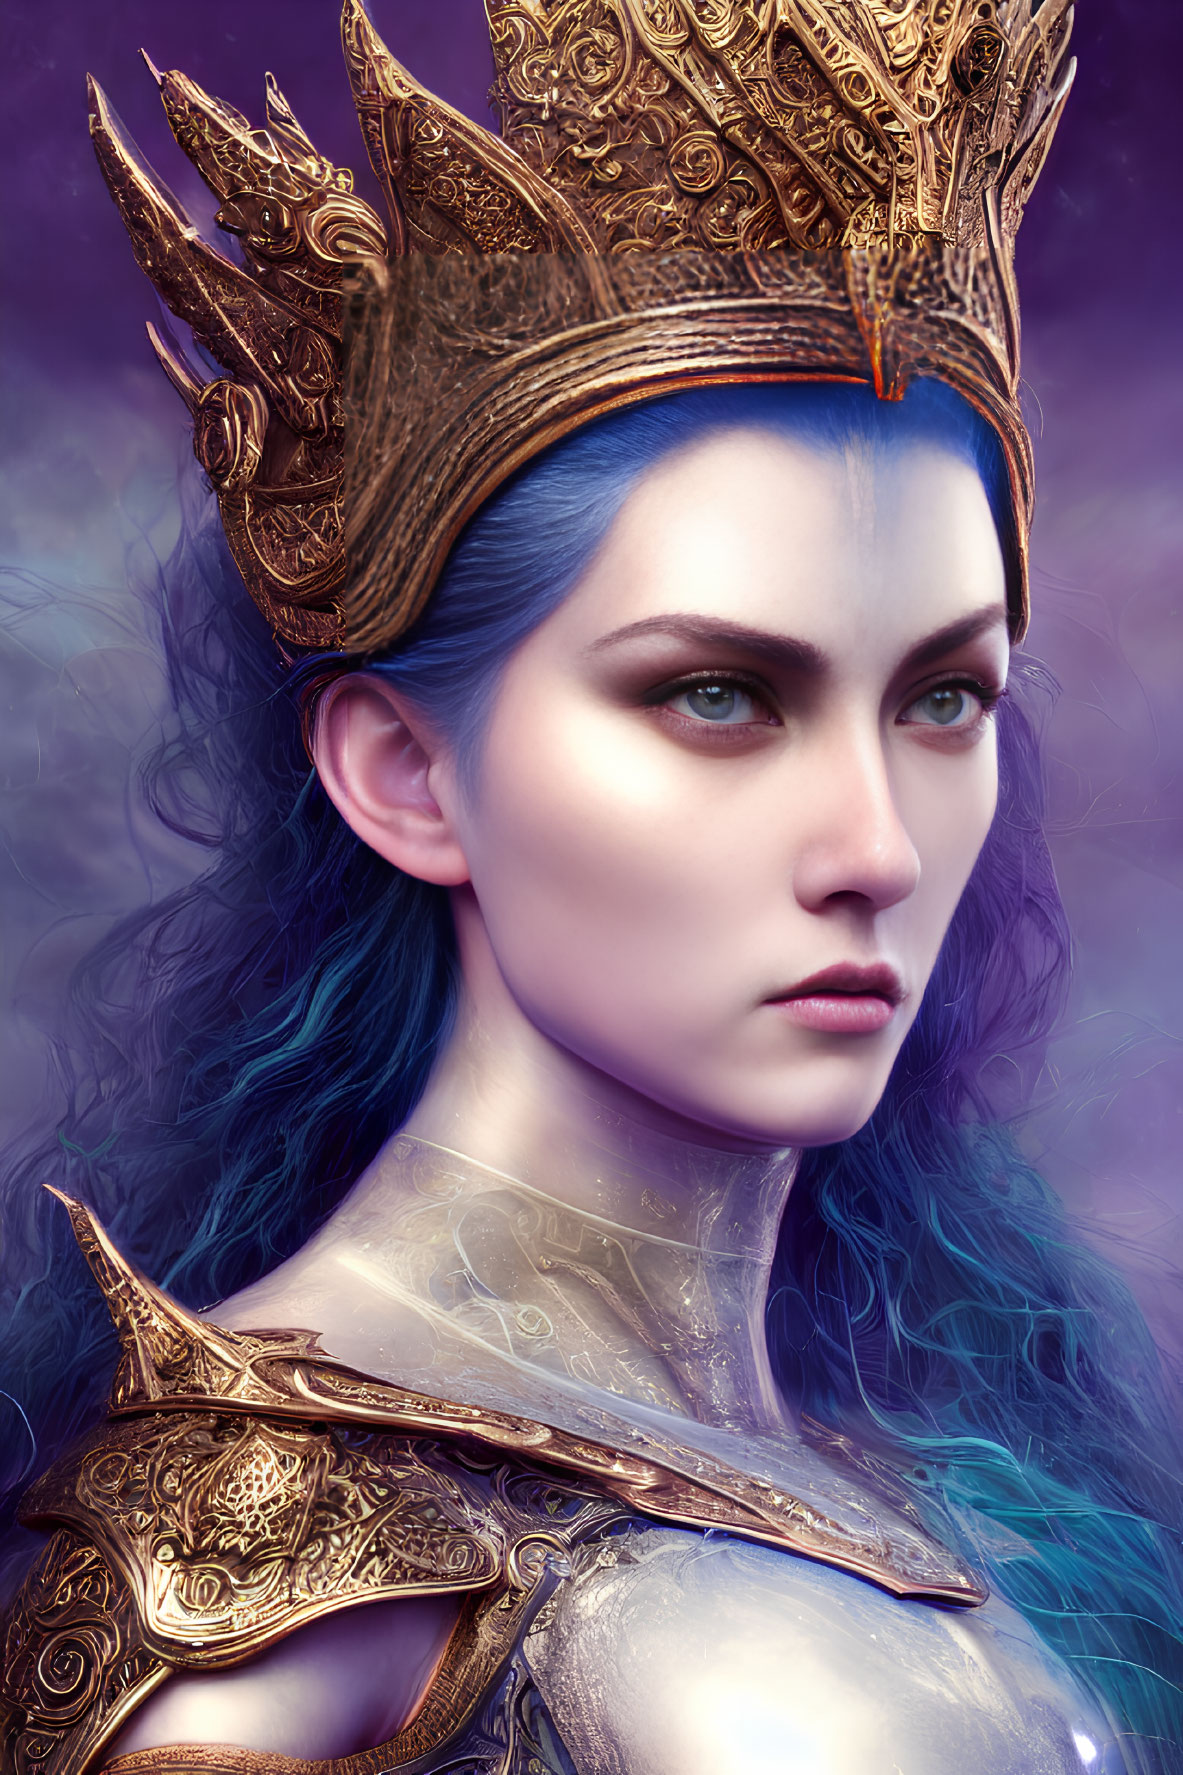 Regal Figure with Blue Hair and Green Eyes in Ornate Bronze Crown and Armor